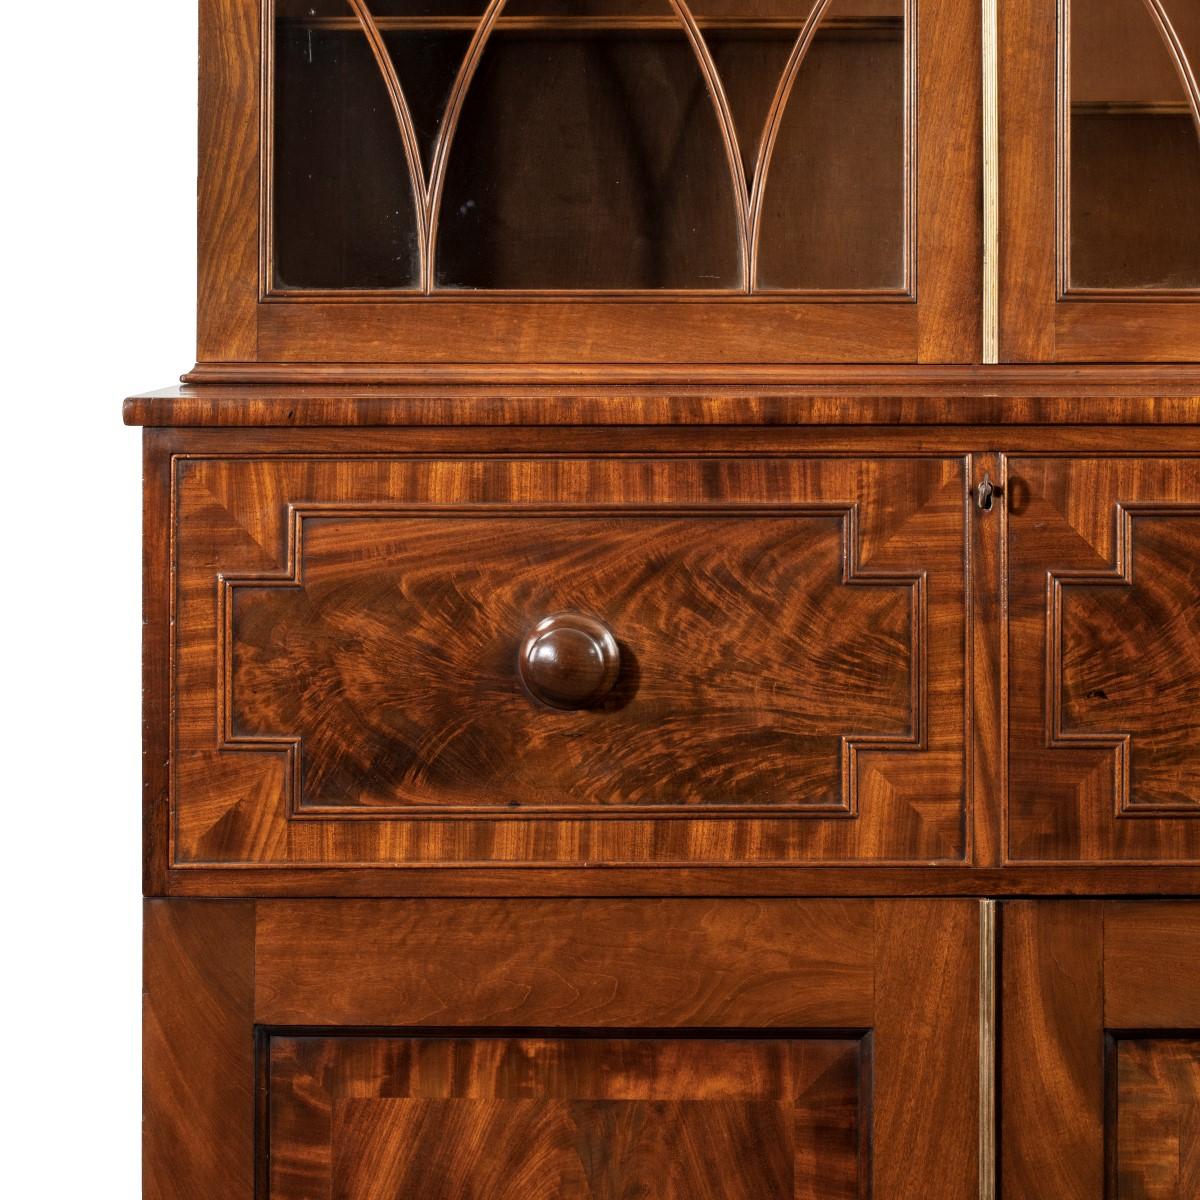 Early 19th Century Late George III Mahogany Secretaire Bookcase Attributed to Gillows